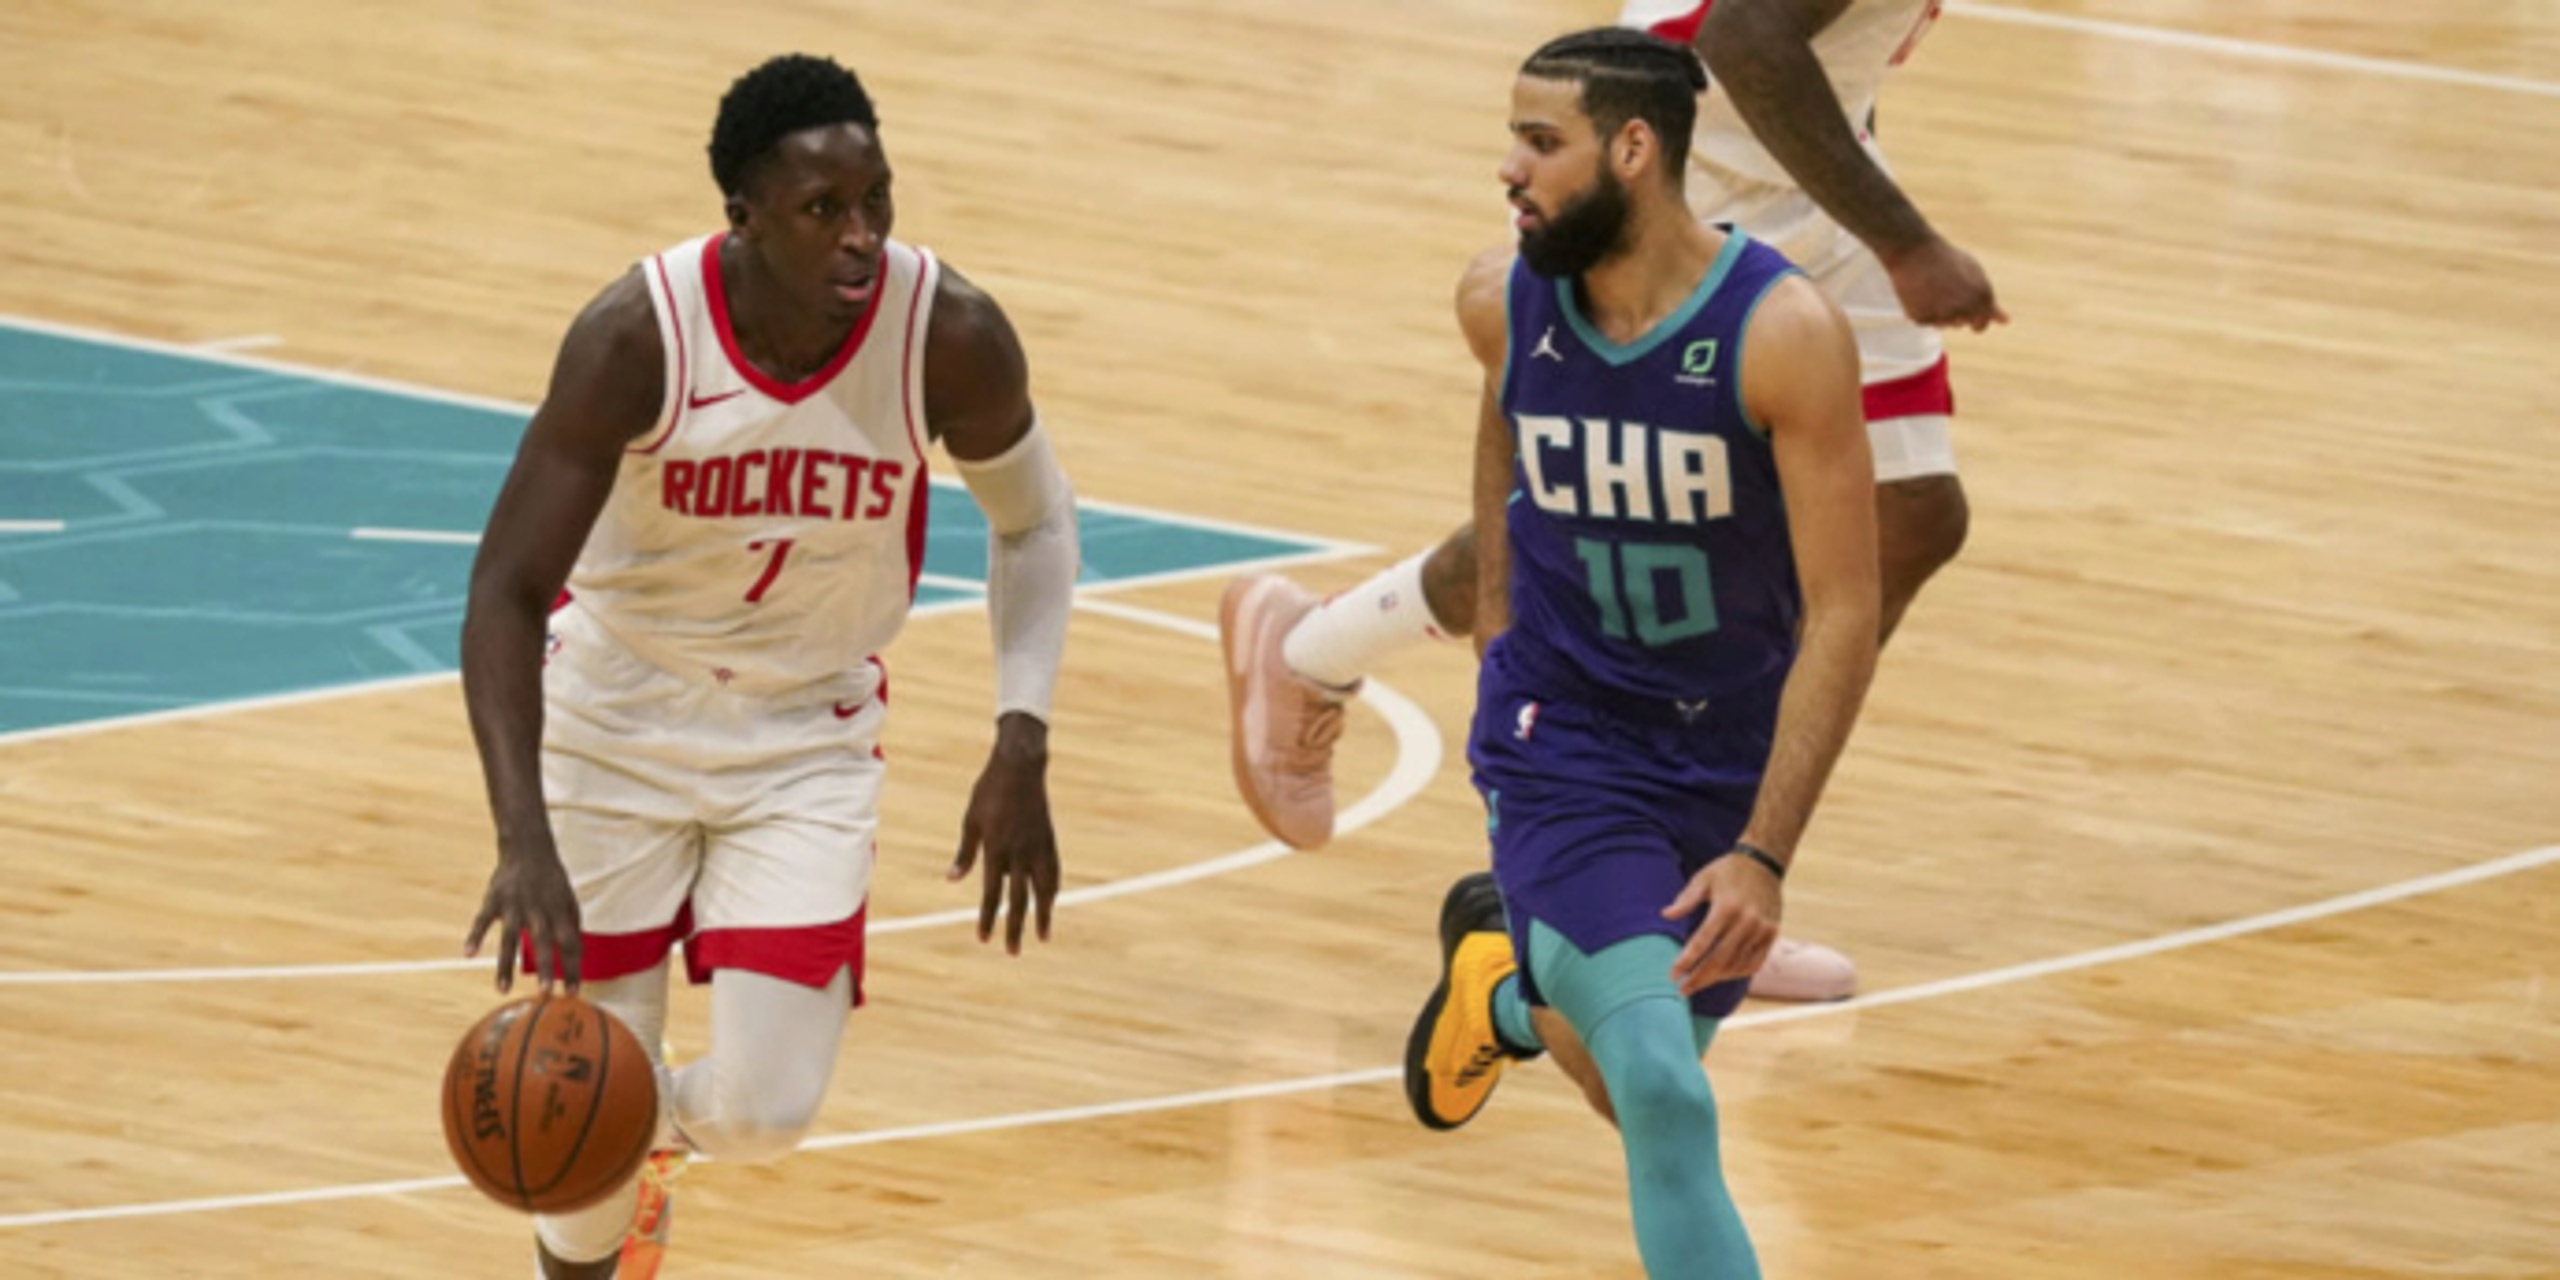 Rockets expected to launch 'fire sale' at trade deadline